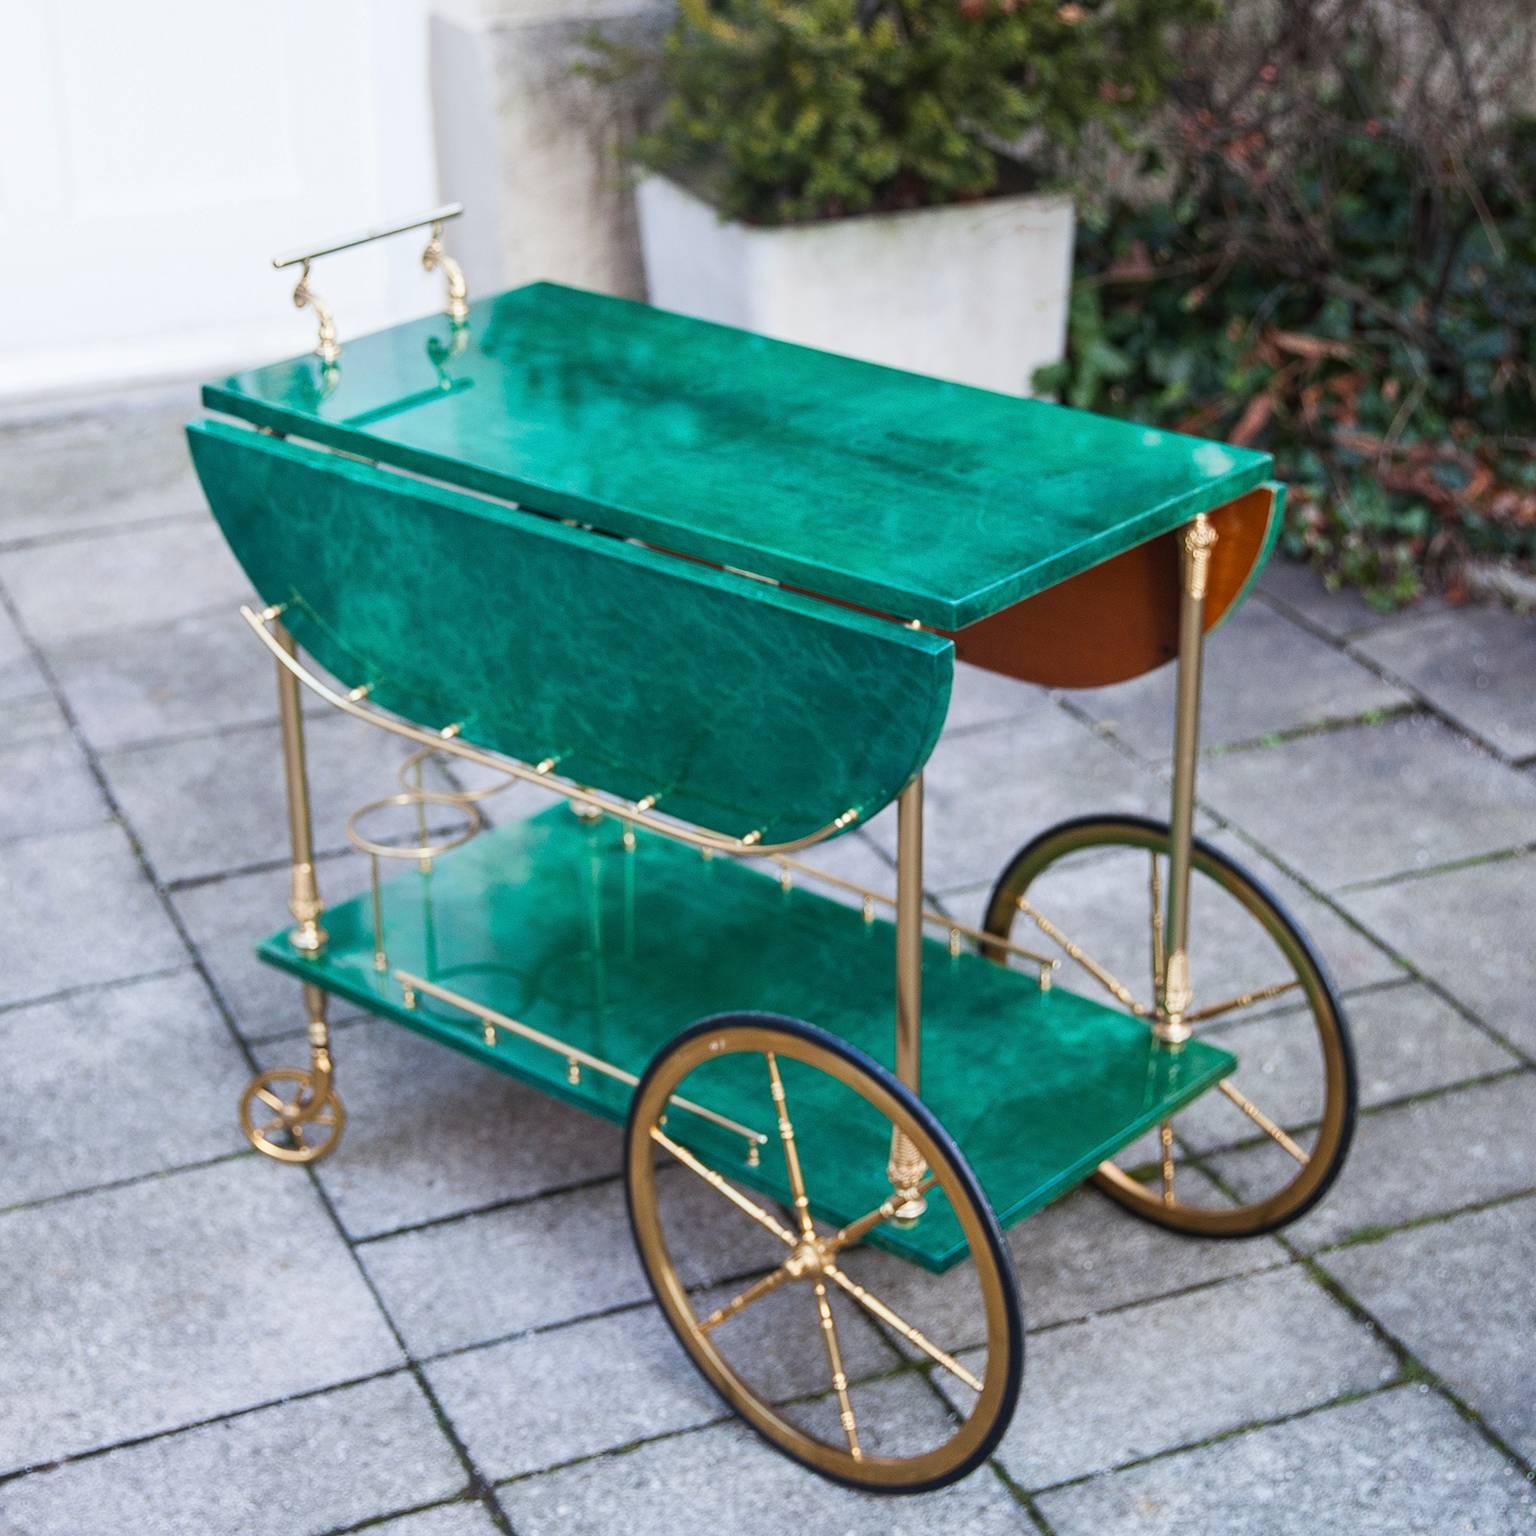 Elegant lacquered goatskin bar cart by Aldo Tura in emerald green. The sides can be fold up. The goatskin shows a stunning deep tone, which is in a very nice contrast with the elegant, well designed brass details. Manufactured in Italy,